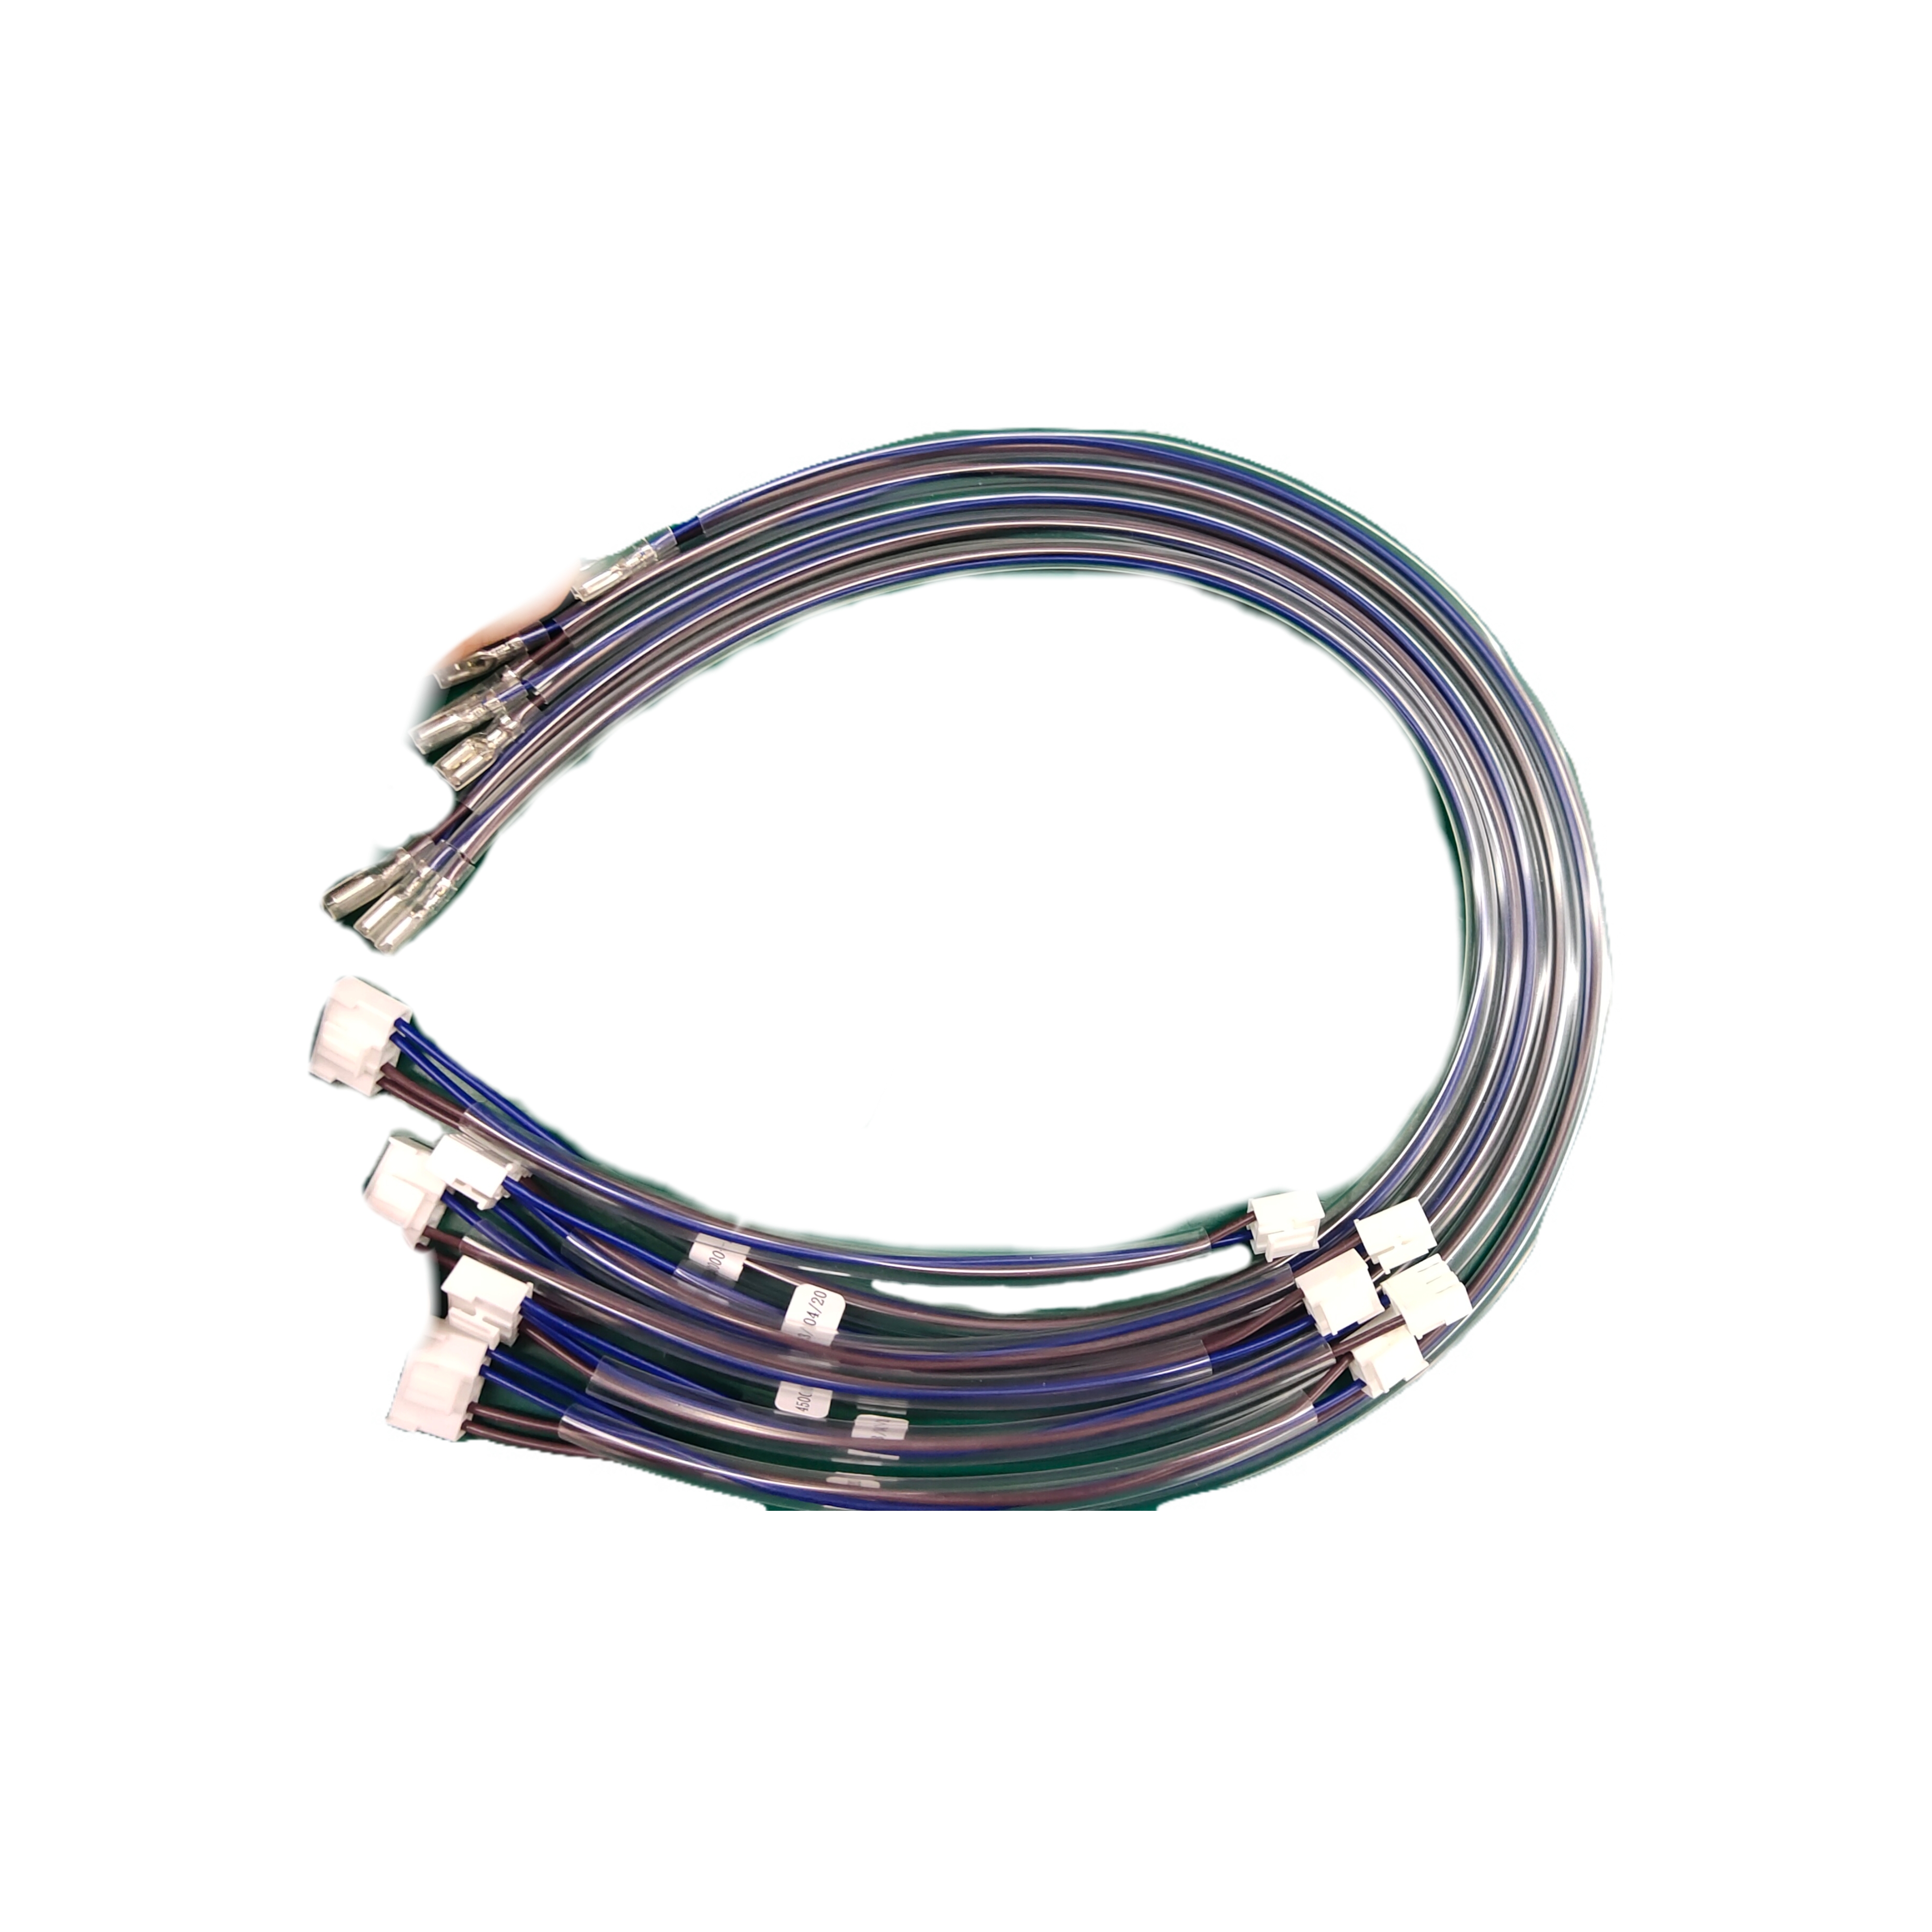 Oxygen-free copper ACDC Input Interface To Connect The Medical Wire Harness